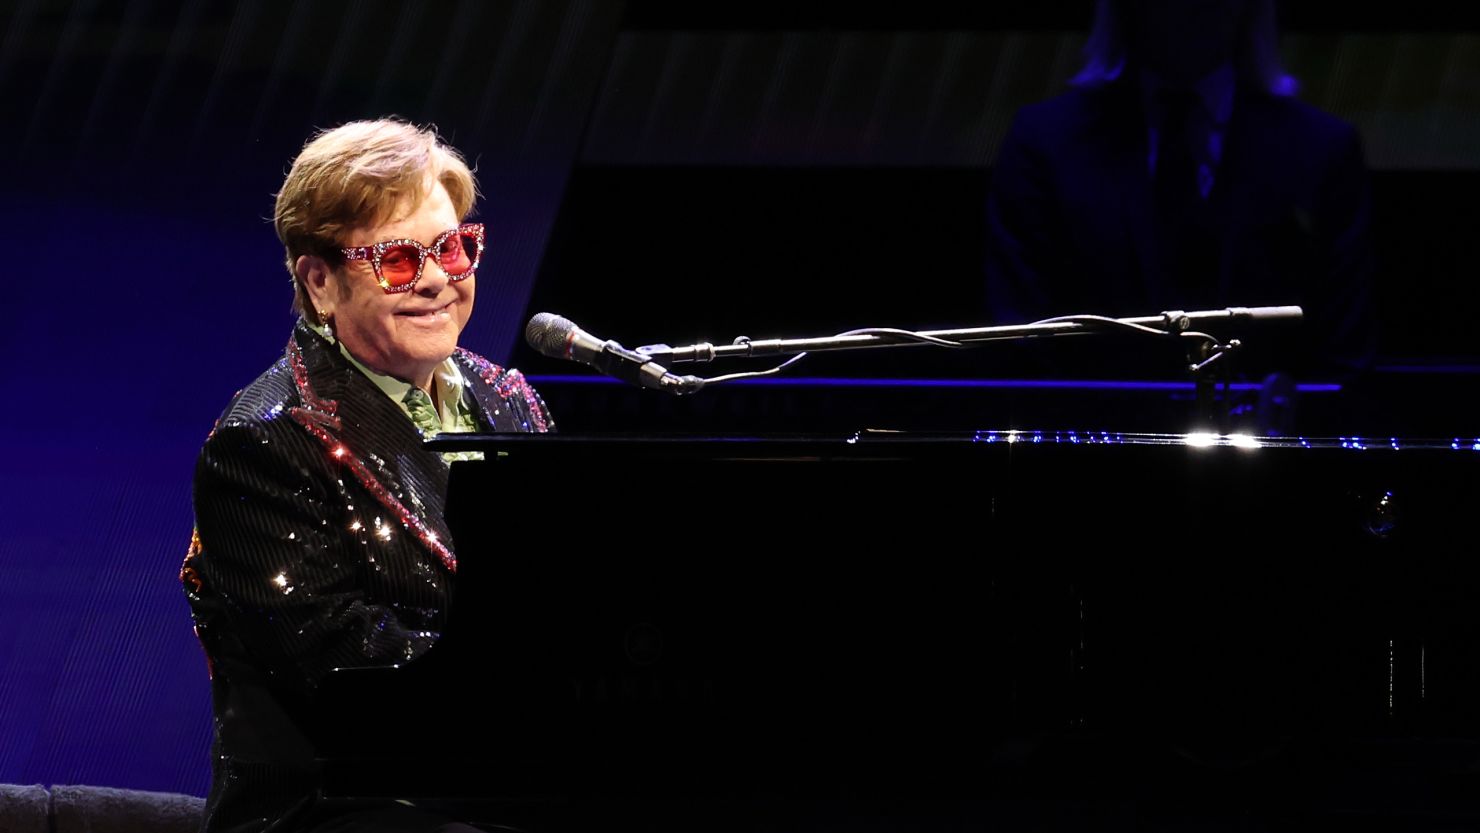 Sir Elton John Performs live on stage during his "Farewell Yellow Brick Road" Tour at The O2 Arena in 2023.